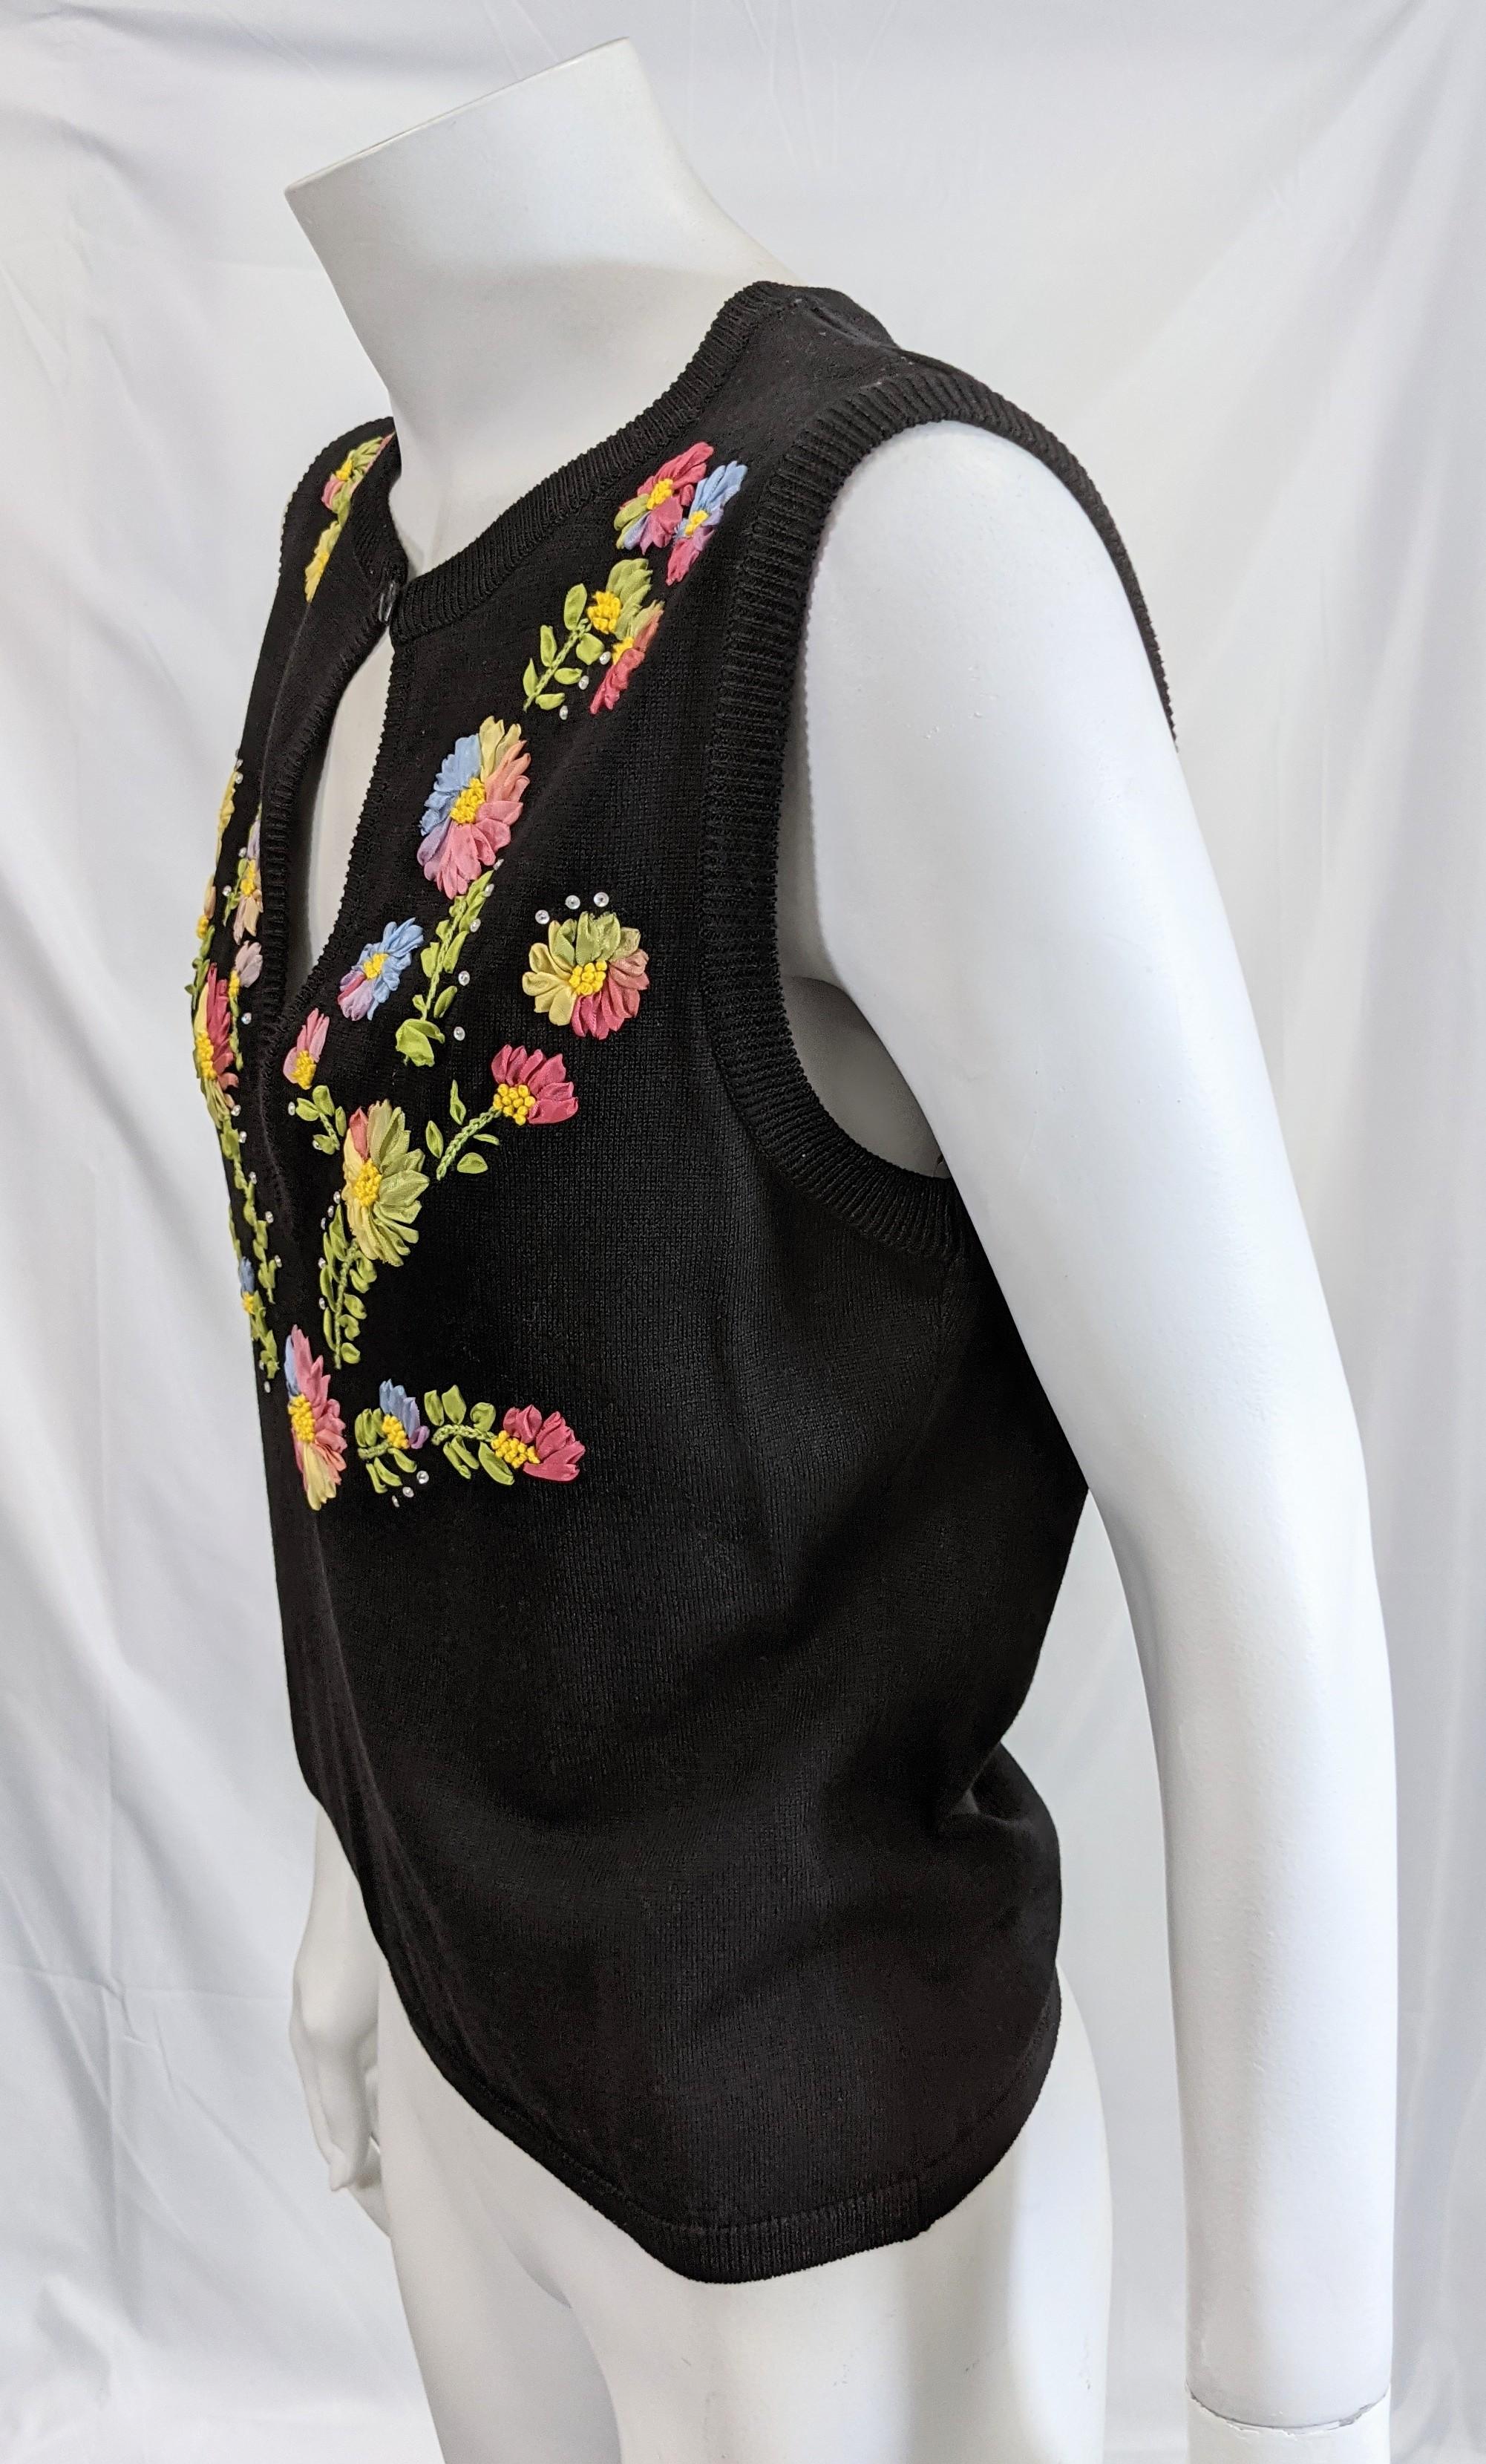 Moschino fine ribbon embroidery and crystal embellished black jersey knit sleeveless pullover. Of cotton and rayon with peek a boo front closure. Excellent Condition.
Length 21